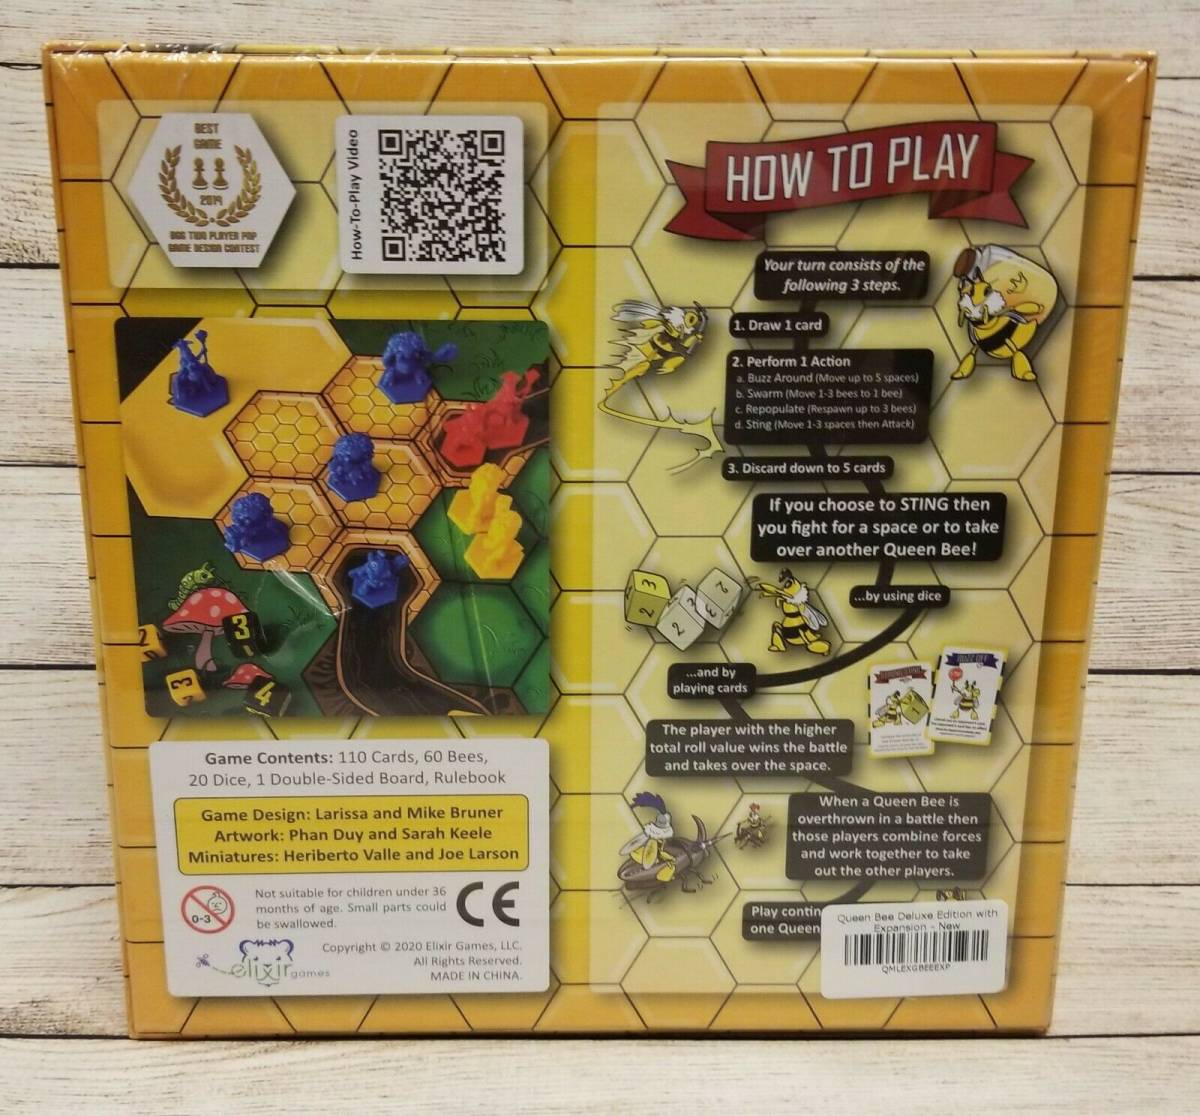 Queen Bee Deluxe Kickstarter Edition w/ Miniatures 5/6 player expansion SEALED 